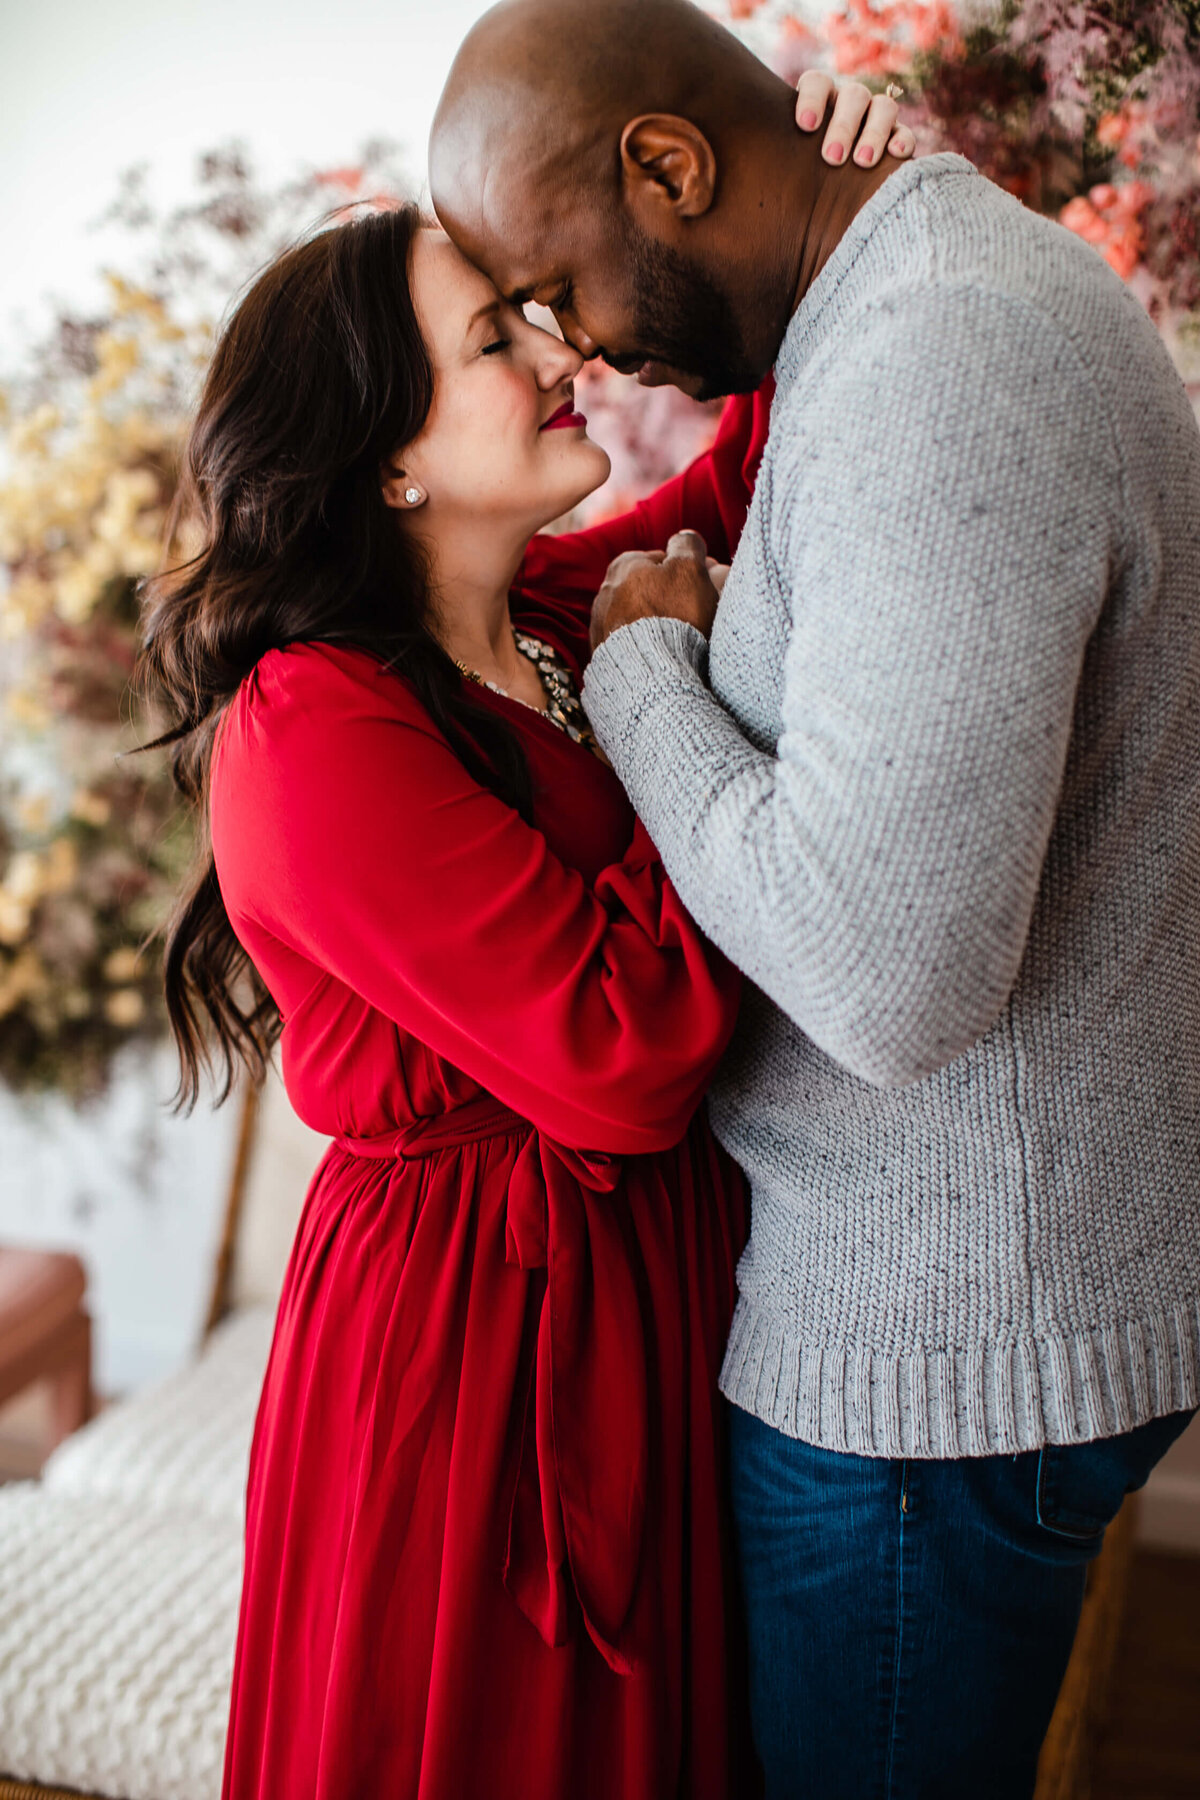 Valentines-Day-Mini-Session-Family-Photography-Woodbury-Minnesota-Sigrid-Dabelstein-Photography-_M4A9362